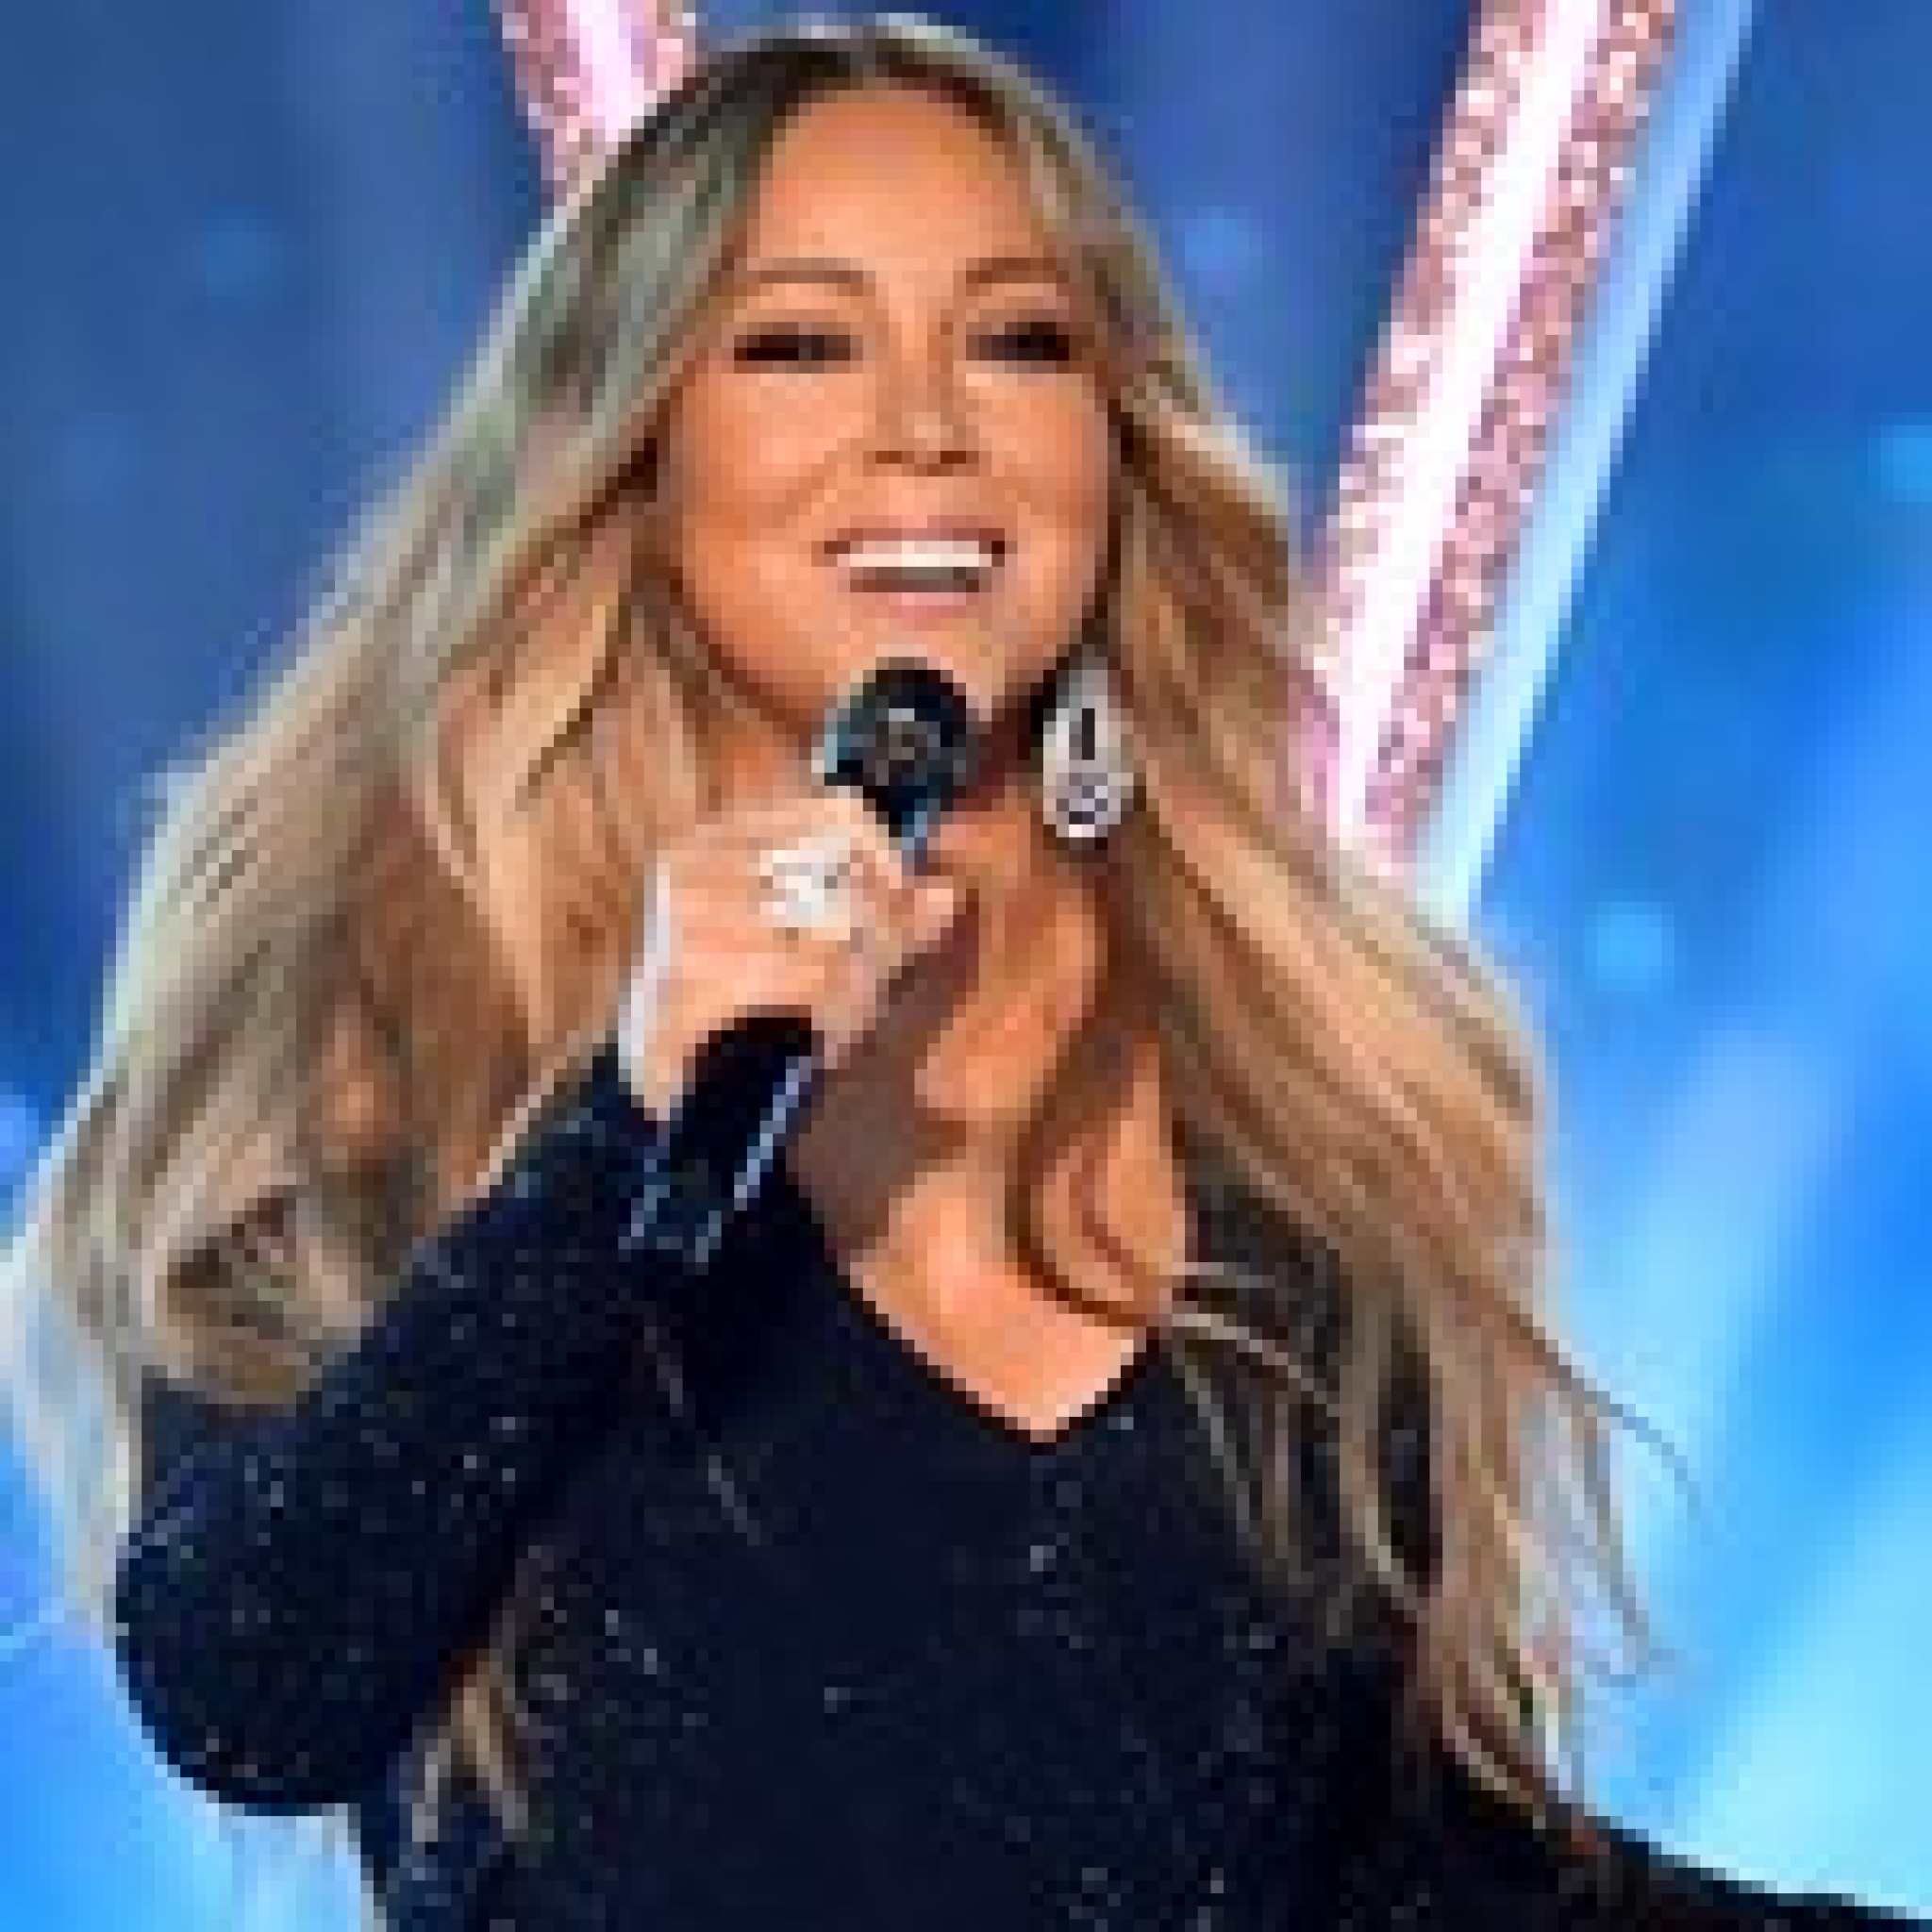 Mariah Carey’s COVID-19 Vaccine Has Her Hitting a High Note